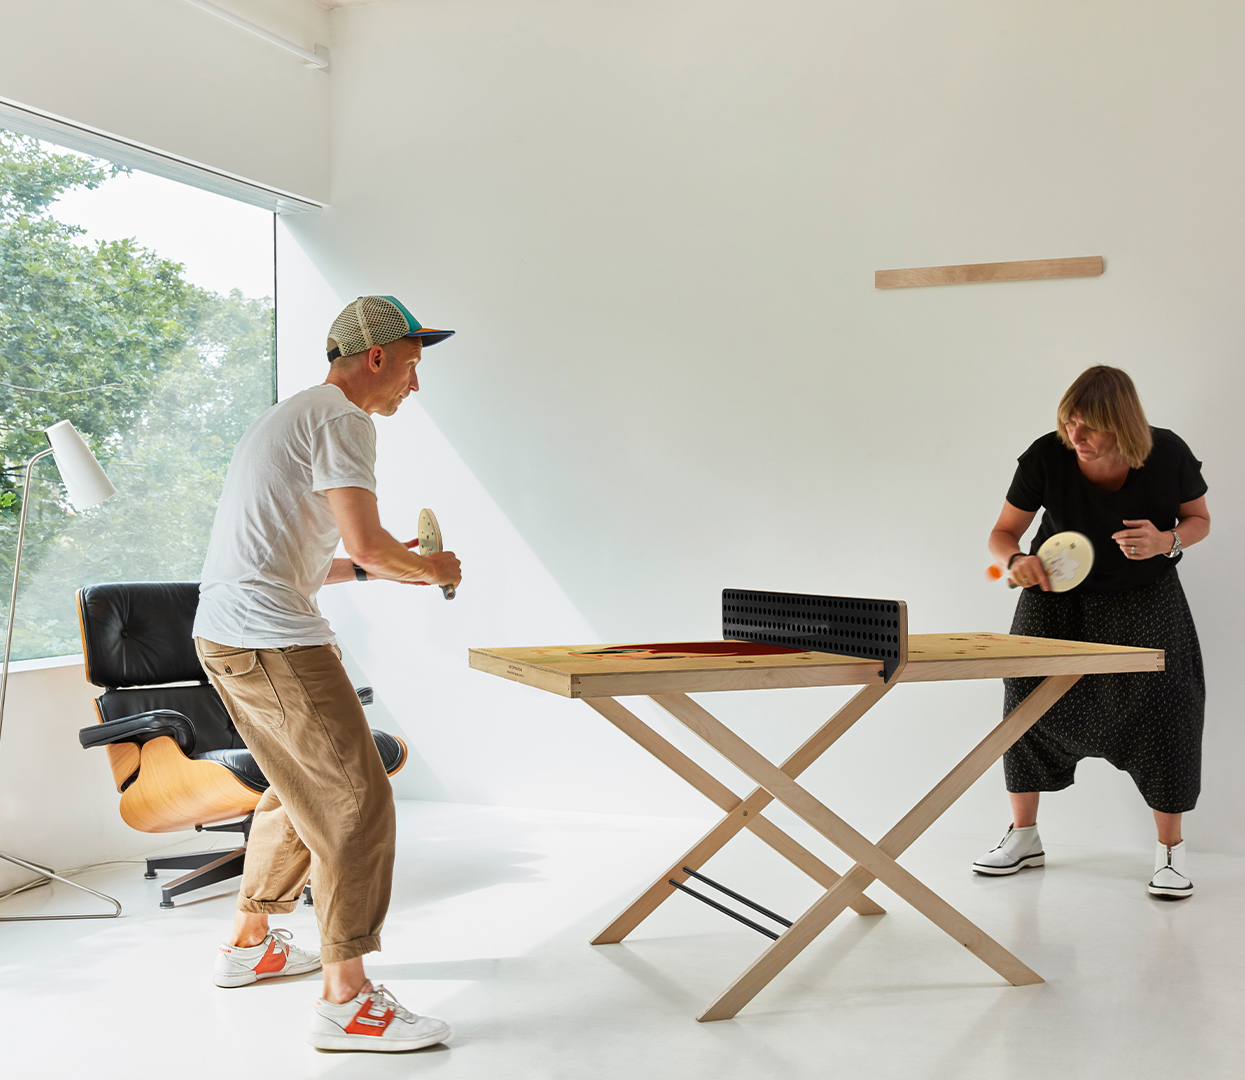 Javier Calleja x Art of Ping Pong ArtTable in white studio with Eames Chair